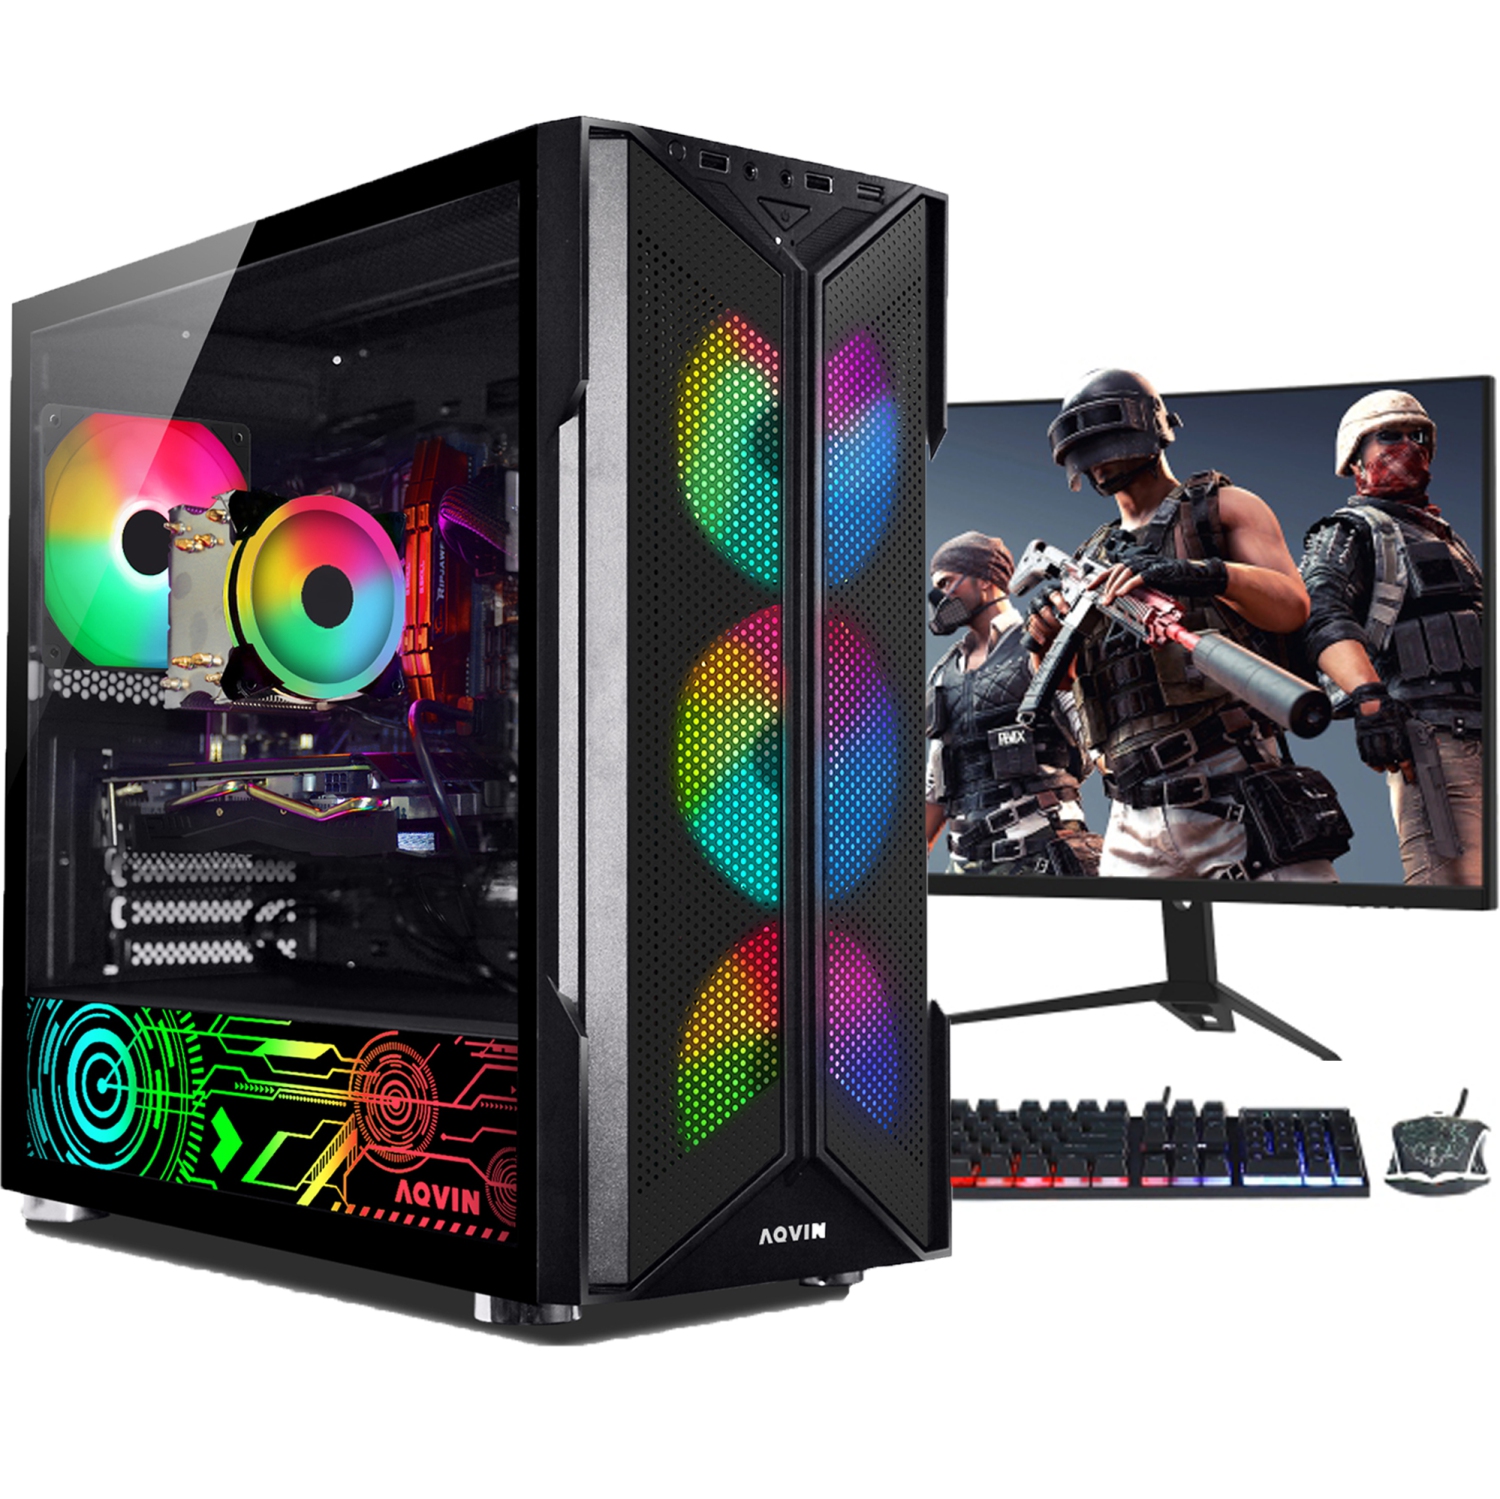 Gaming PC AQVIN AQ20 Desktop Computer - 27 inch Curved Gaming Monitor (Intel Hexa-Core i7/ GeForce RTX 3070 8GB GDDR6/ 2TB SSD/ 32GB DDR4 RAM/ Windows 11 Pro) - Only at Best Buy